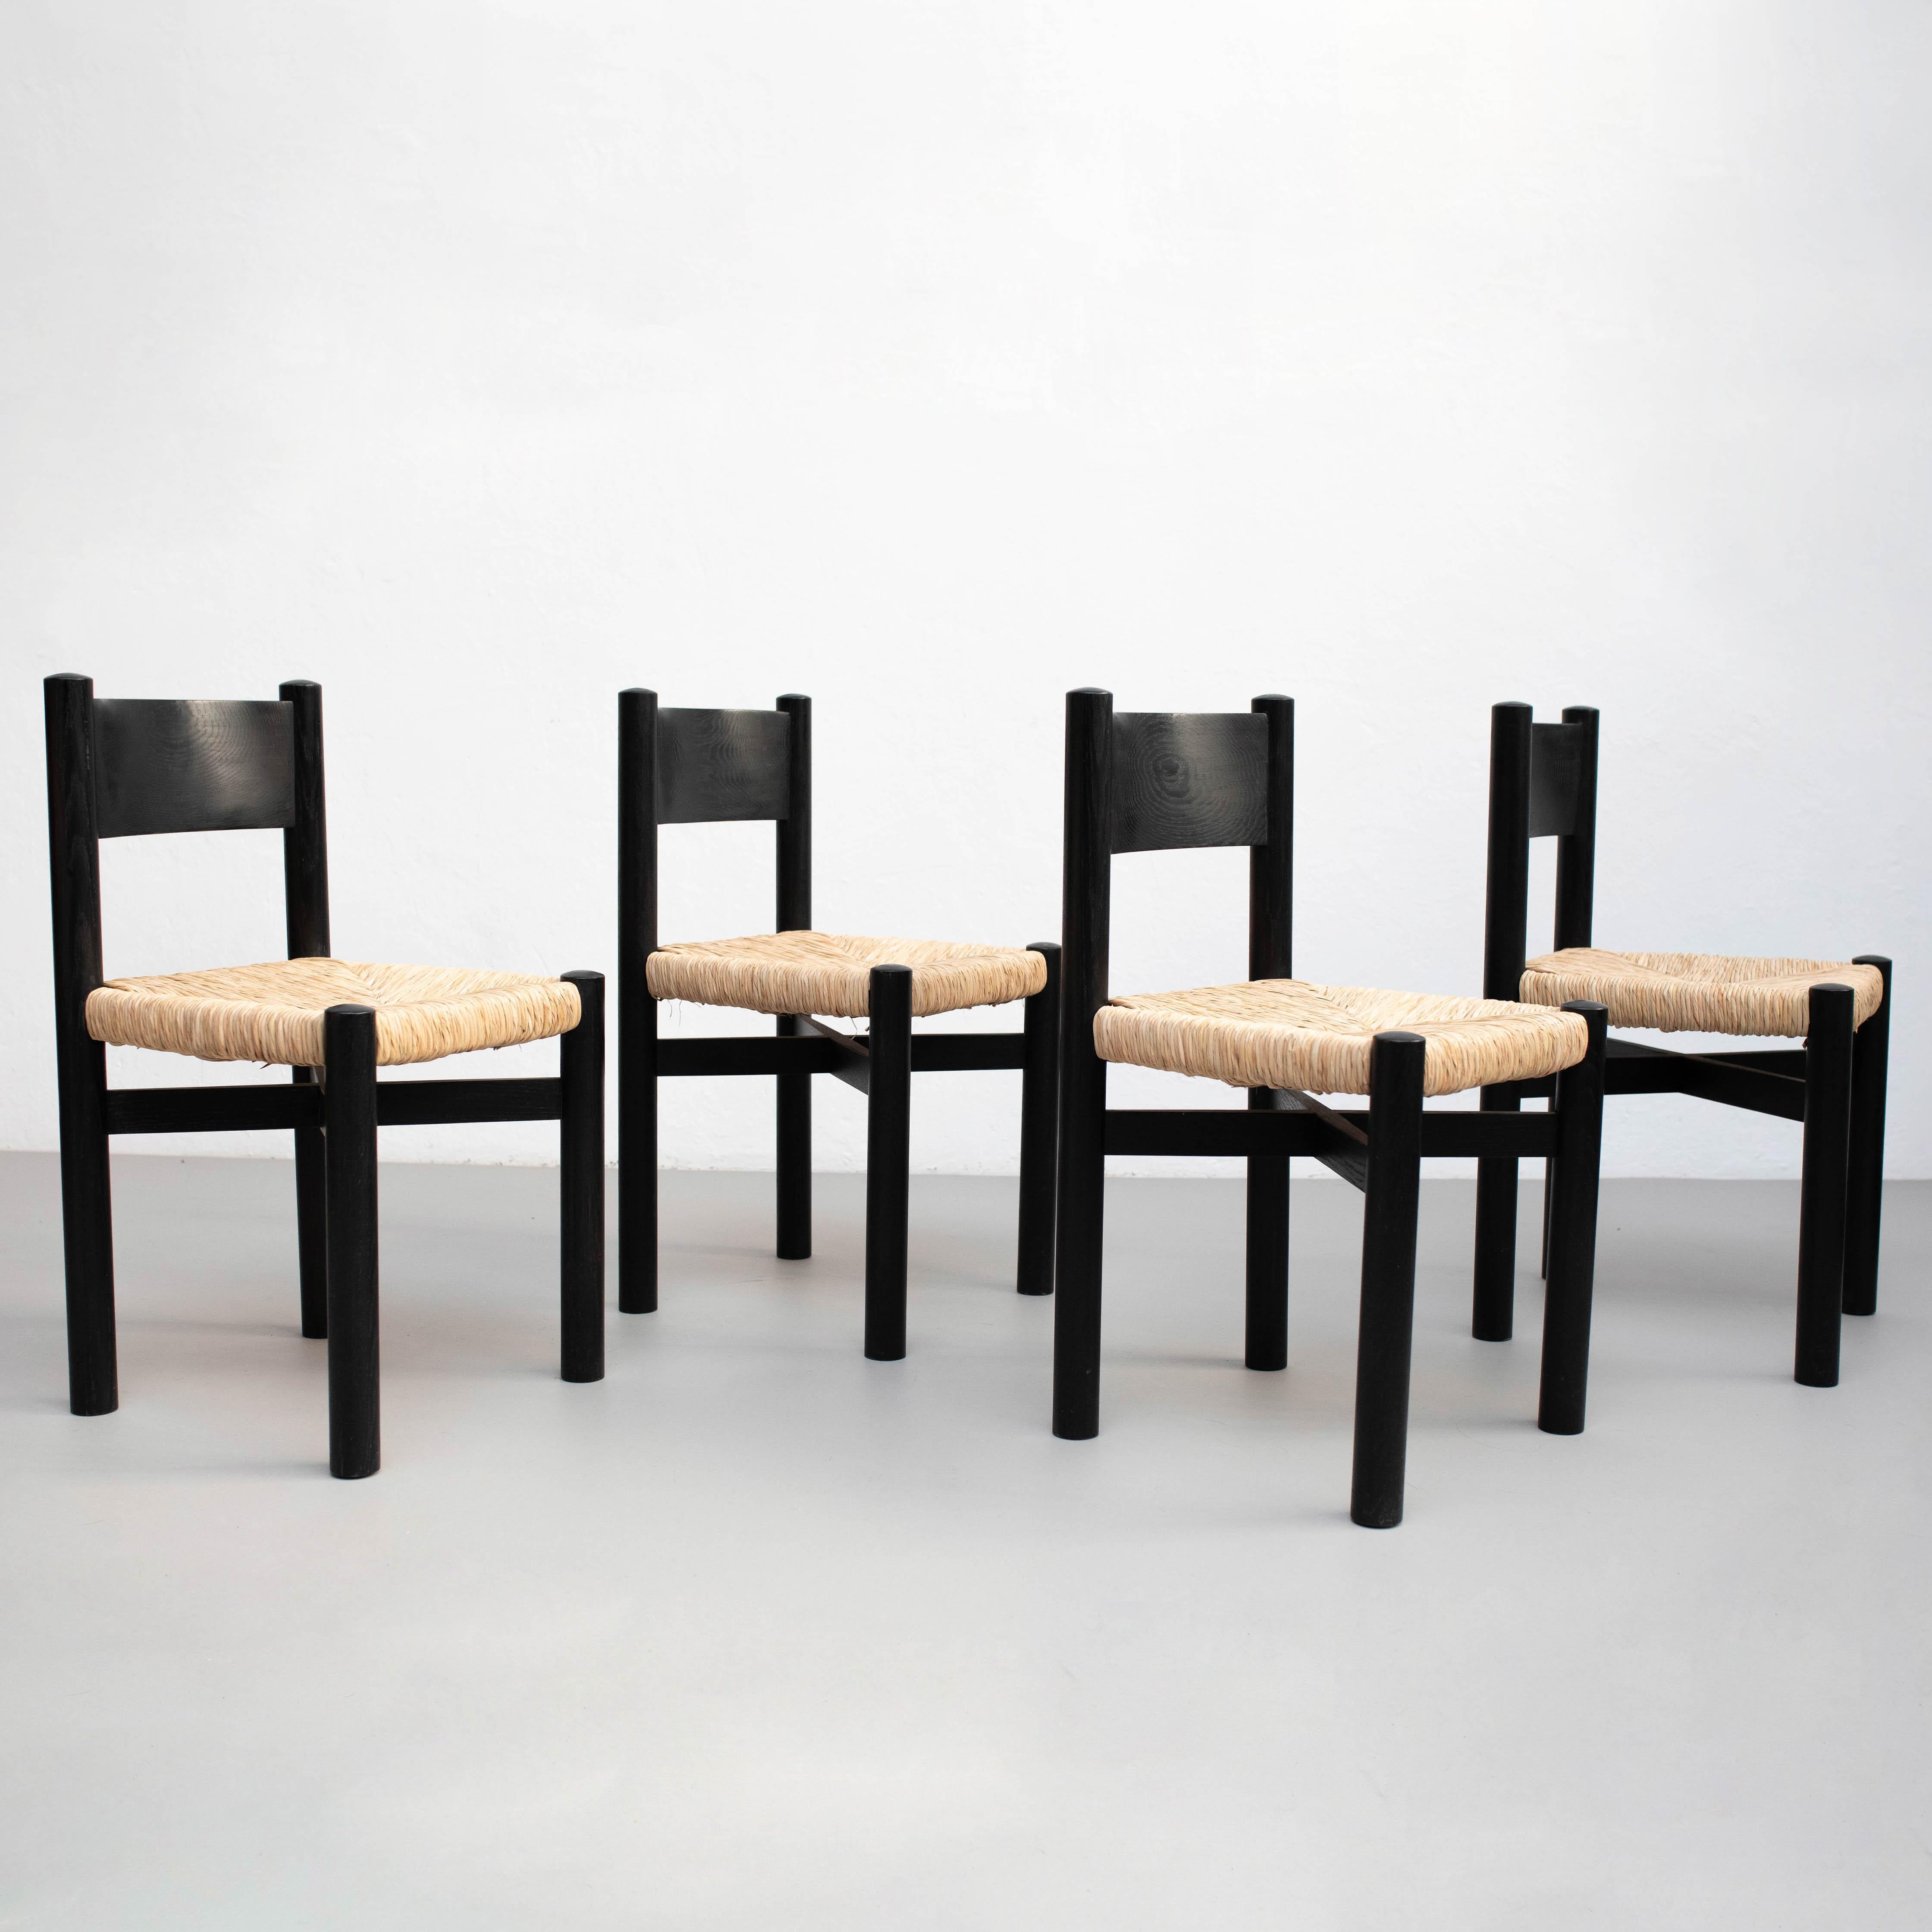 Late 20th Century Set of Four Wood and Rattan Chairs after Charlotte Perriand, circa 1980 For Sale